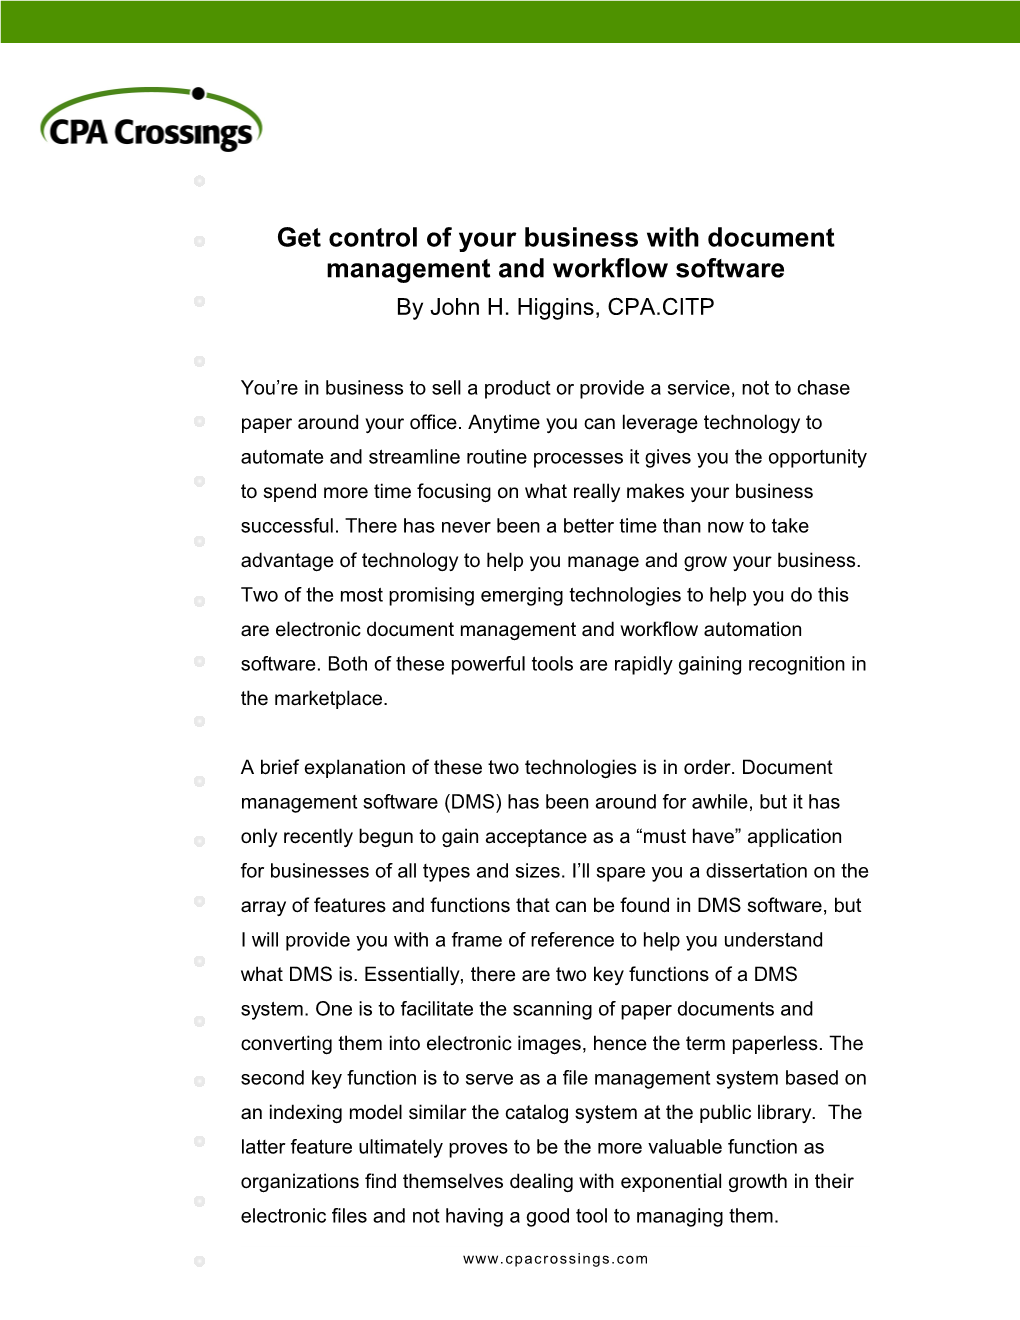 Get Control of Your Business with Document Management and Workflow Software